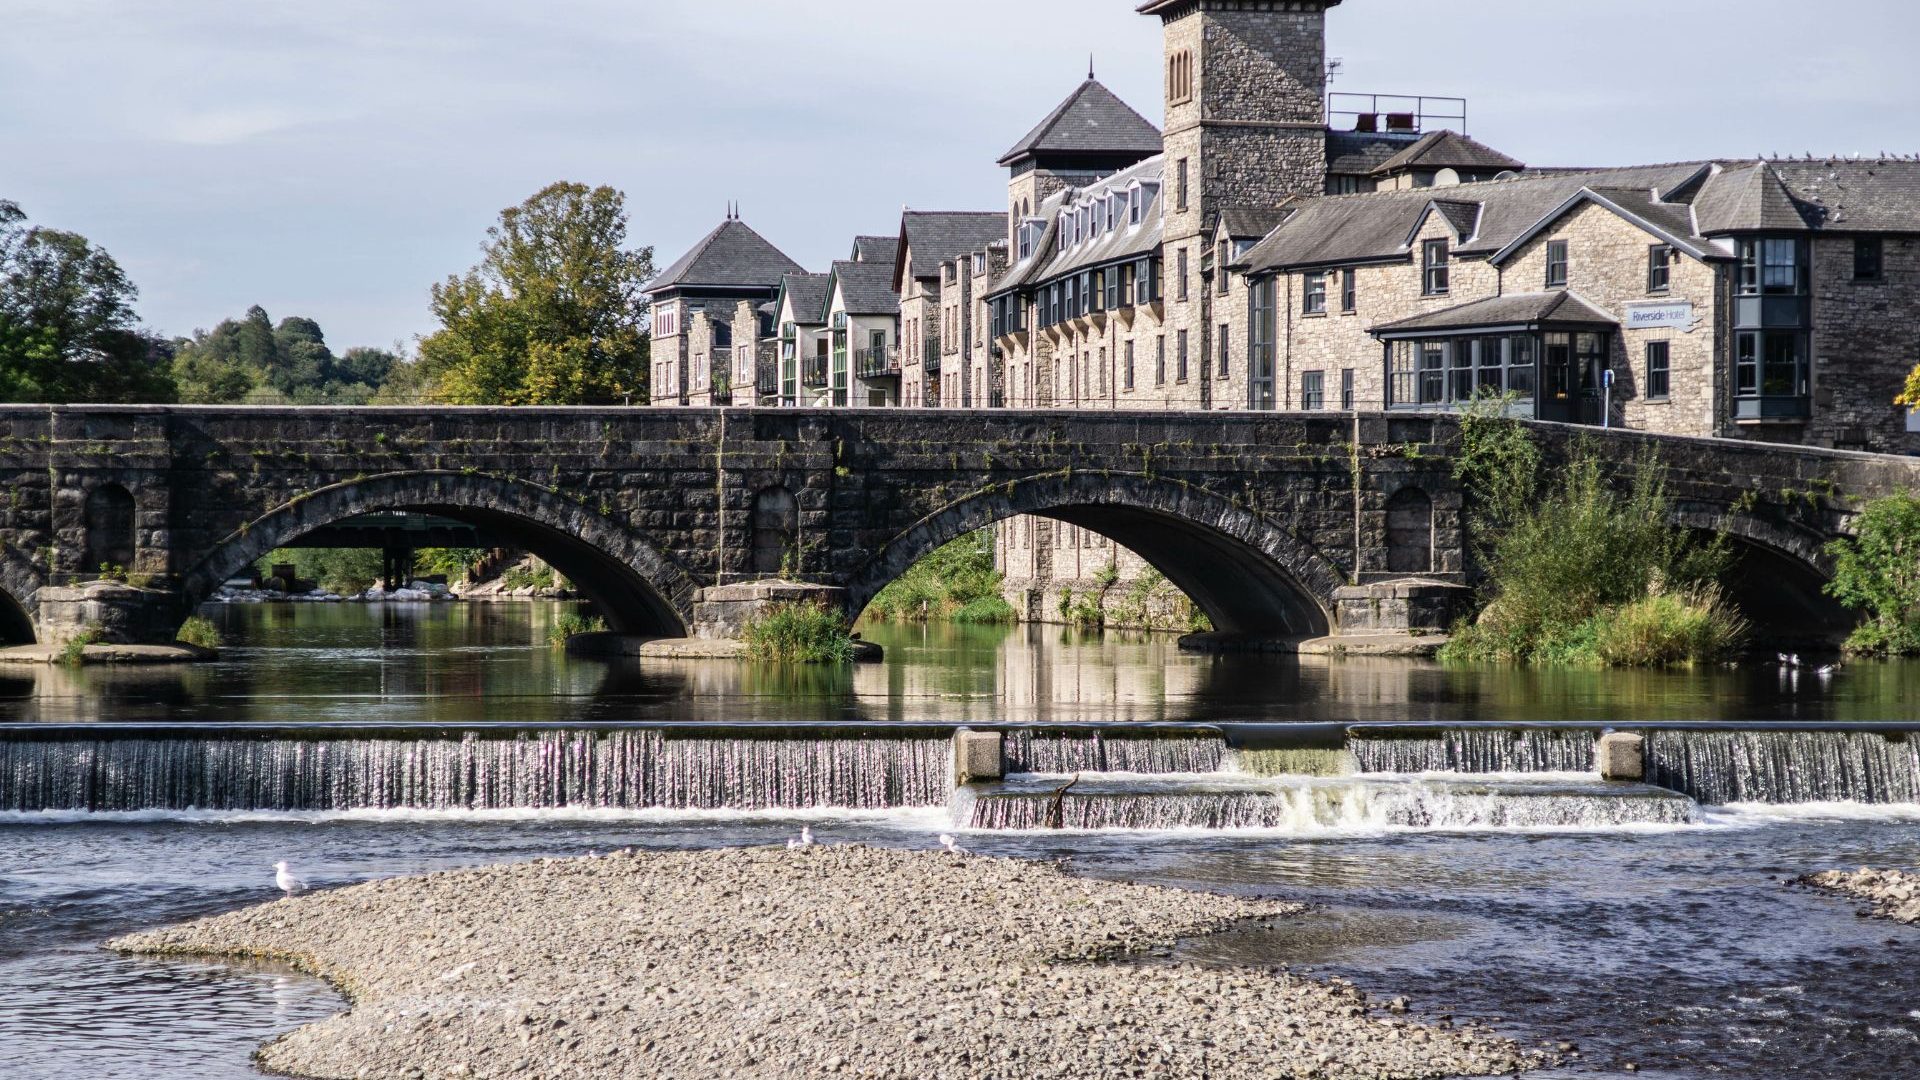 Weir On The River Kent In Kendal In Cumbria